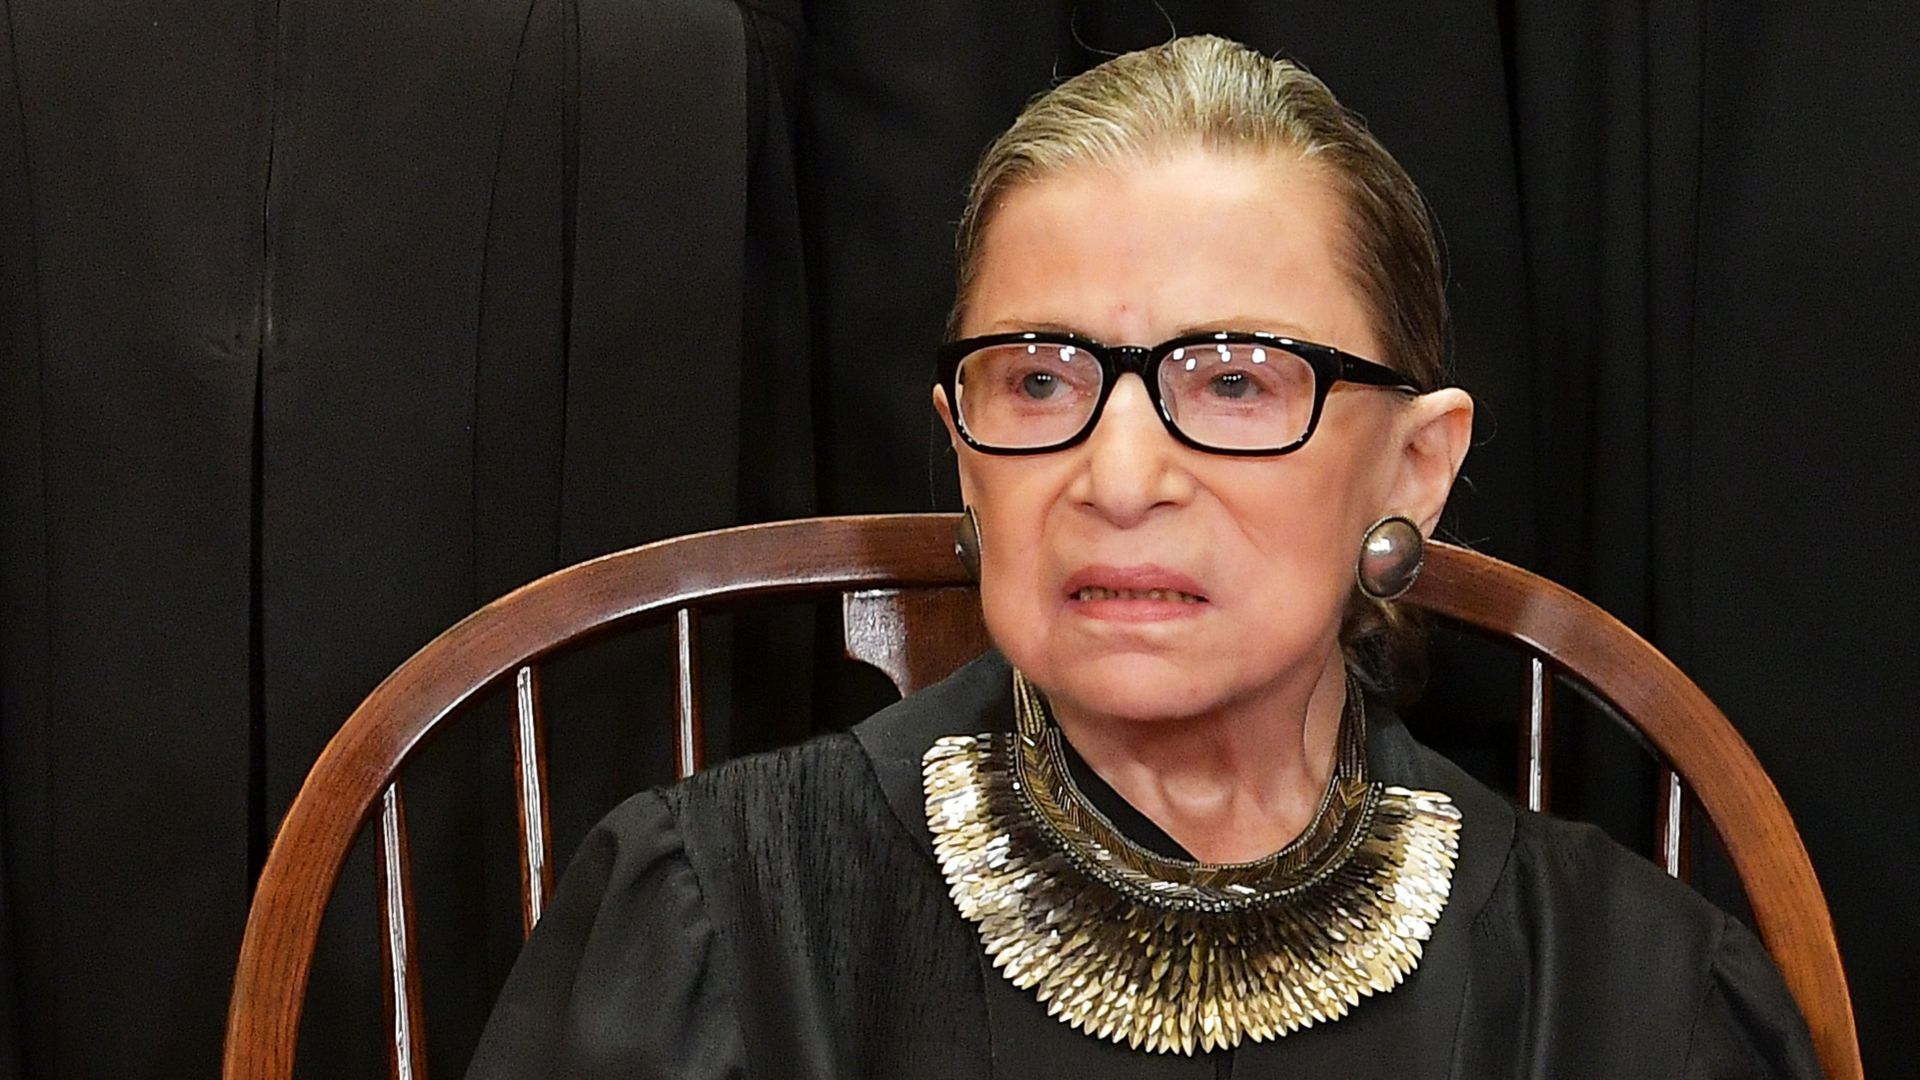 Ruth Bader Ginsburg finishes 3 weeks of radiation therapy